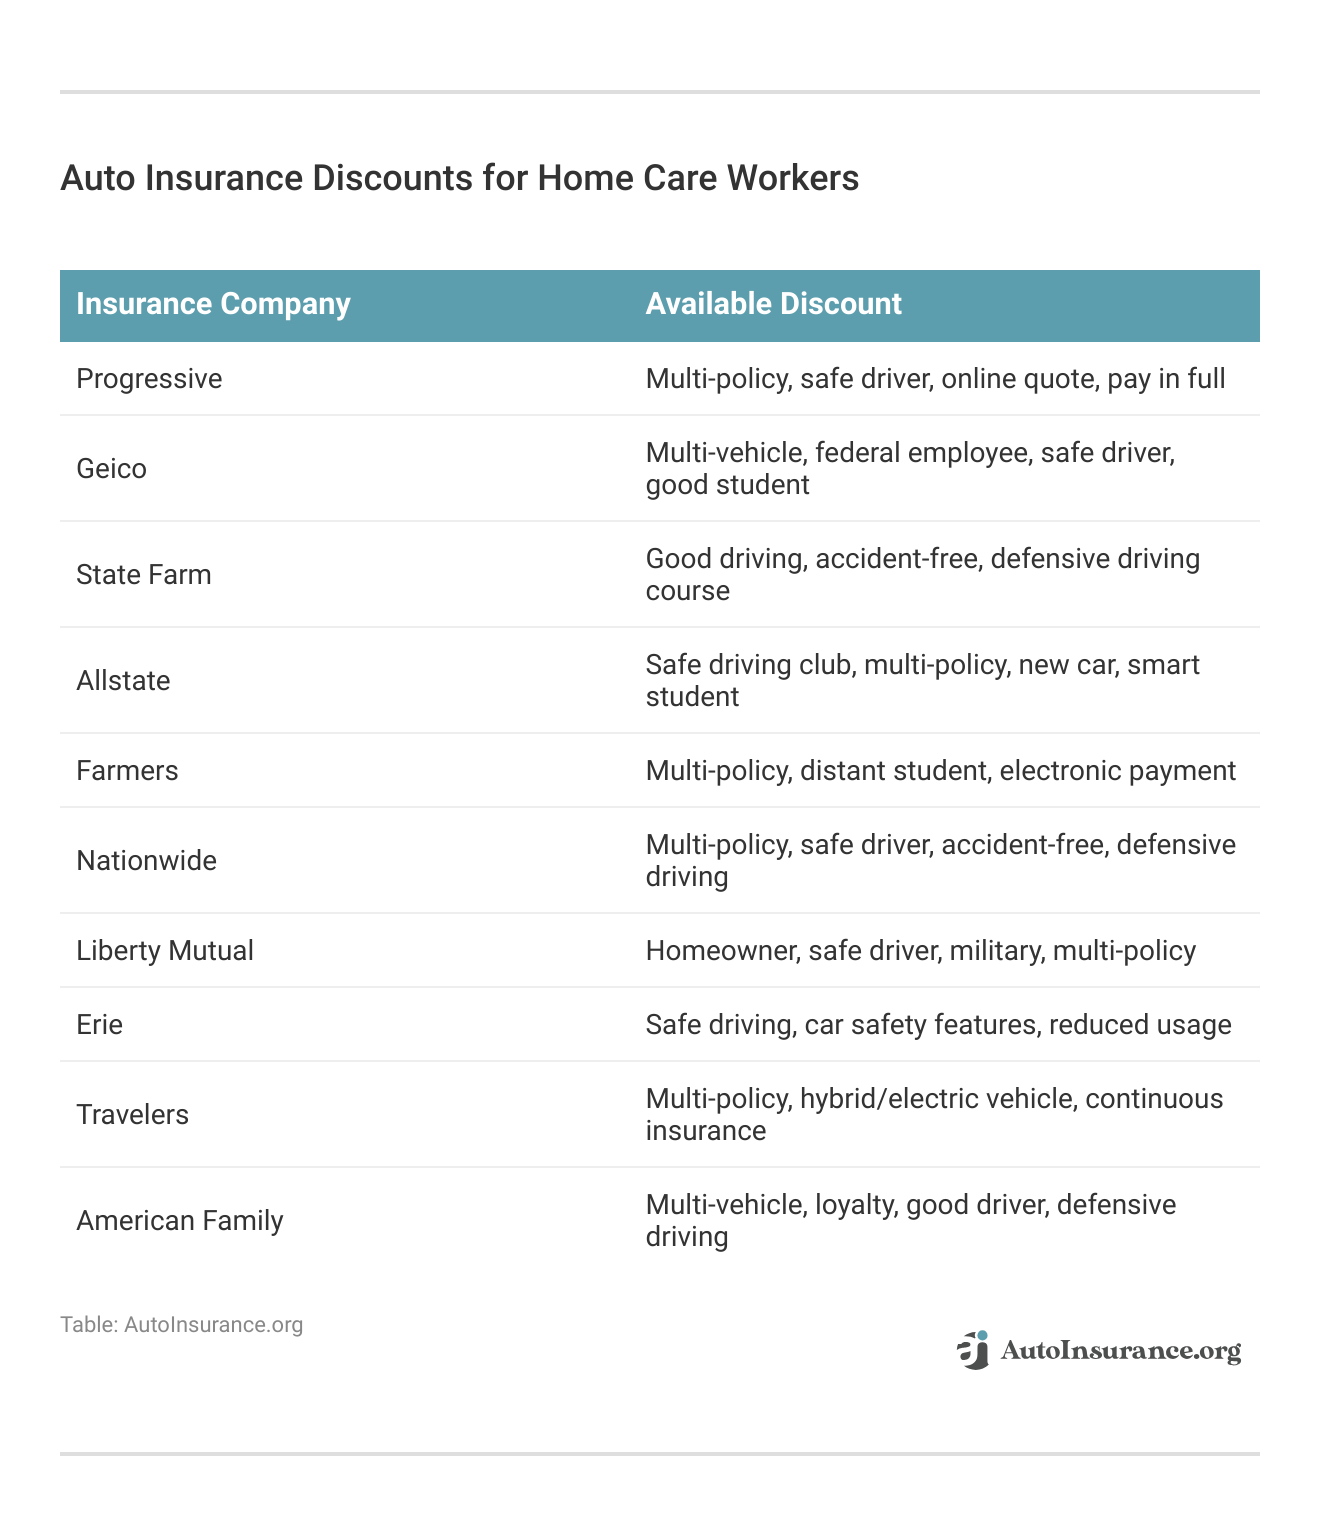 <h3>Auto Insurance Discounts for Home Care Workers</h3>